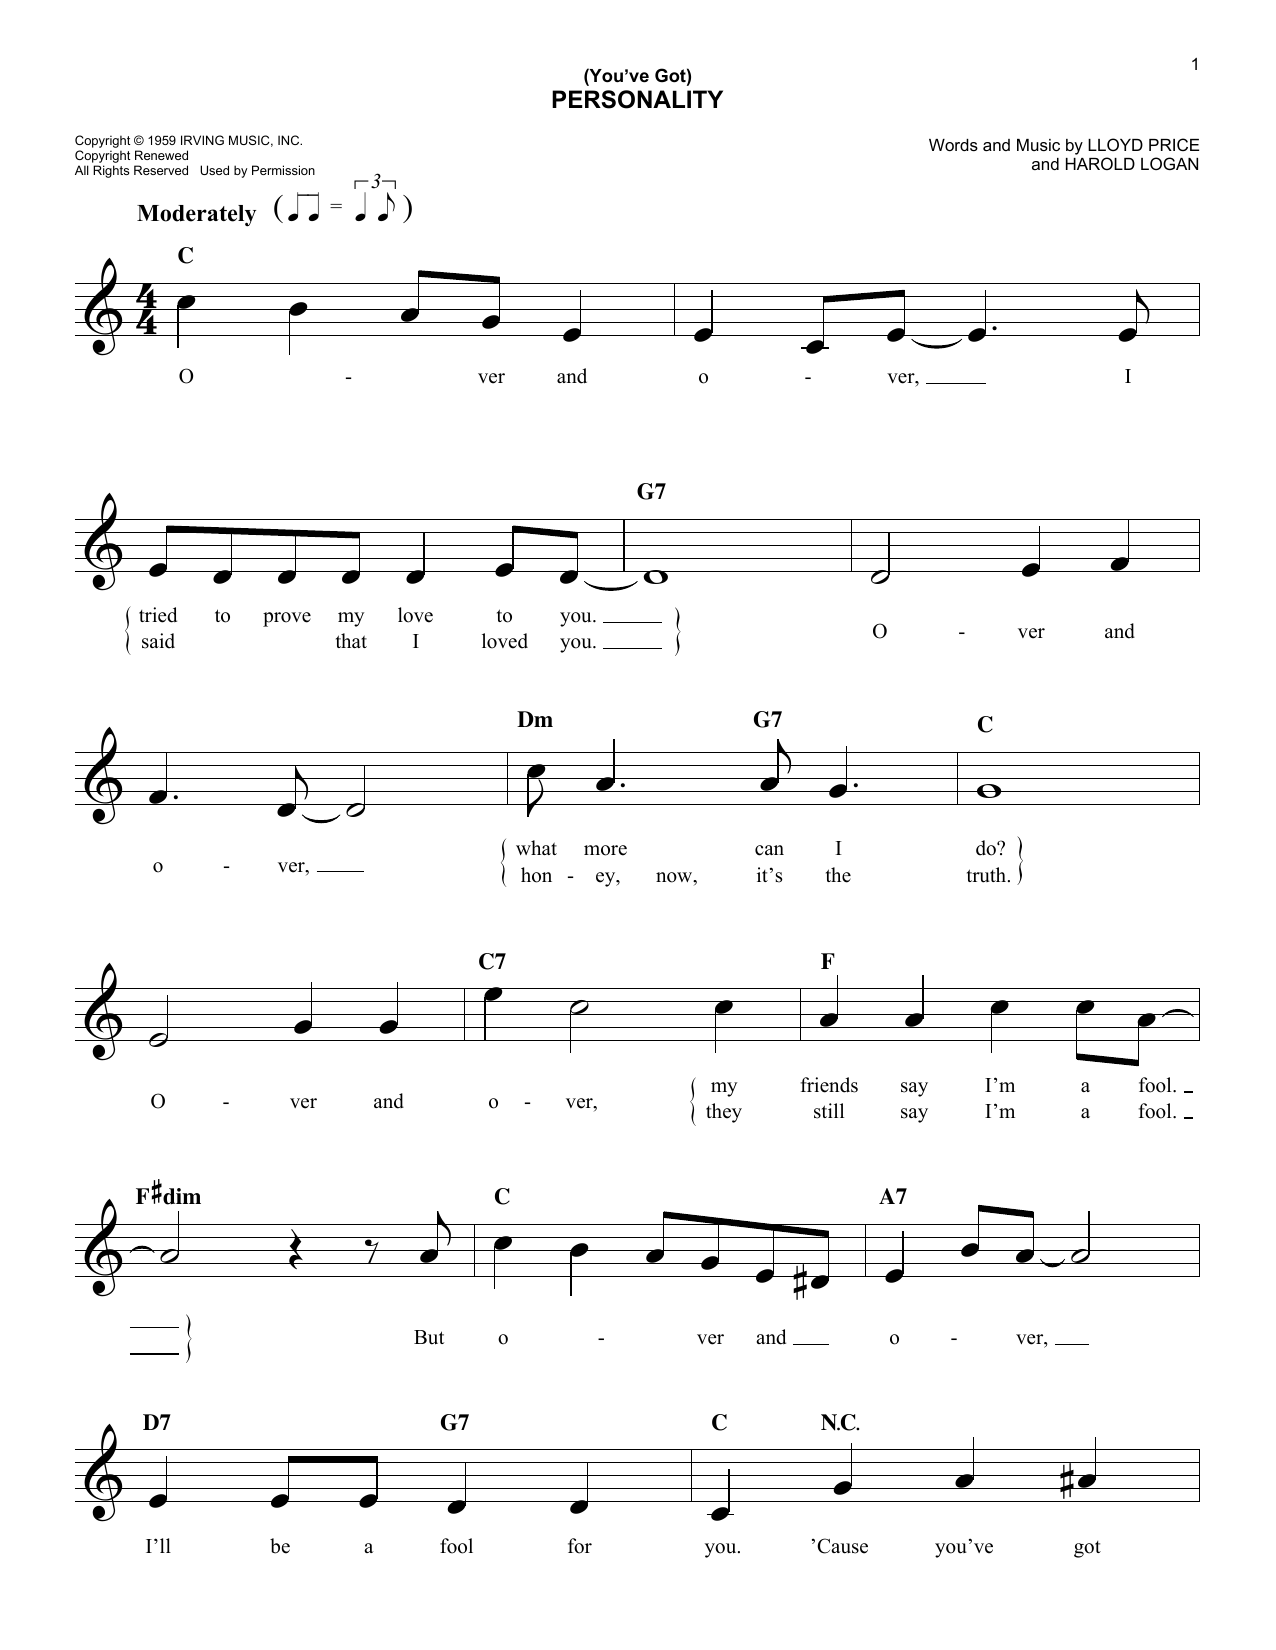 Download Lloyd Price (You've Got) Personality Sheet Music